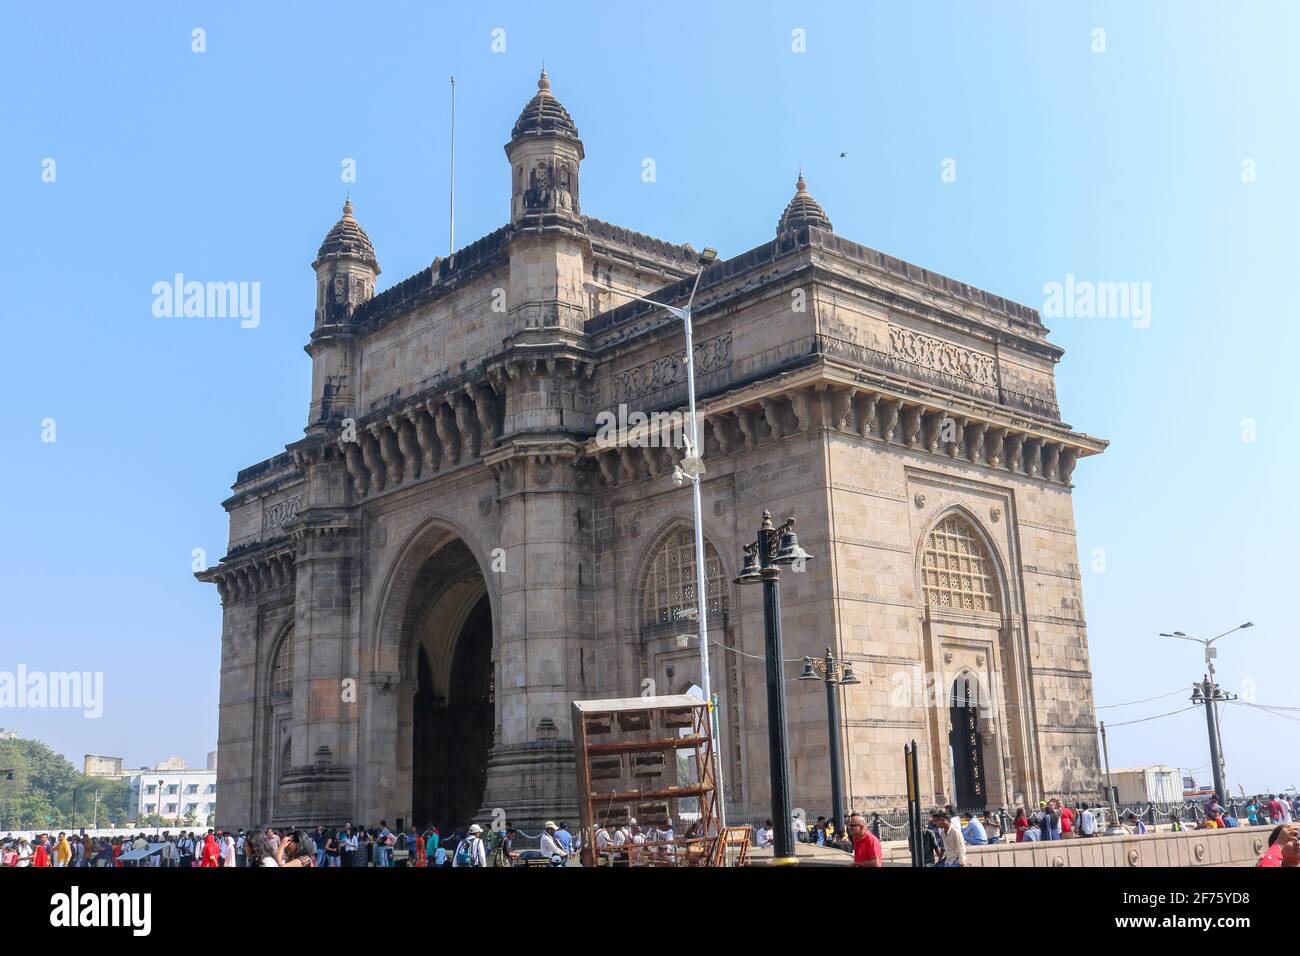 The Gateway of India is an arch-monument built in the early twentieth century in the city of Mumbai, in the Indian state of Maharashtra. Stock Photo